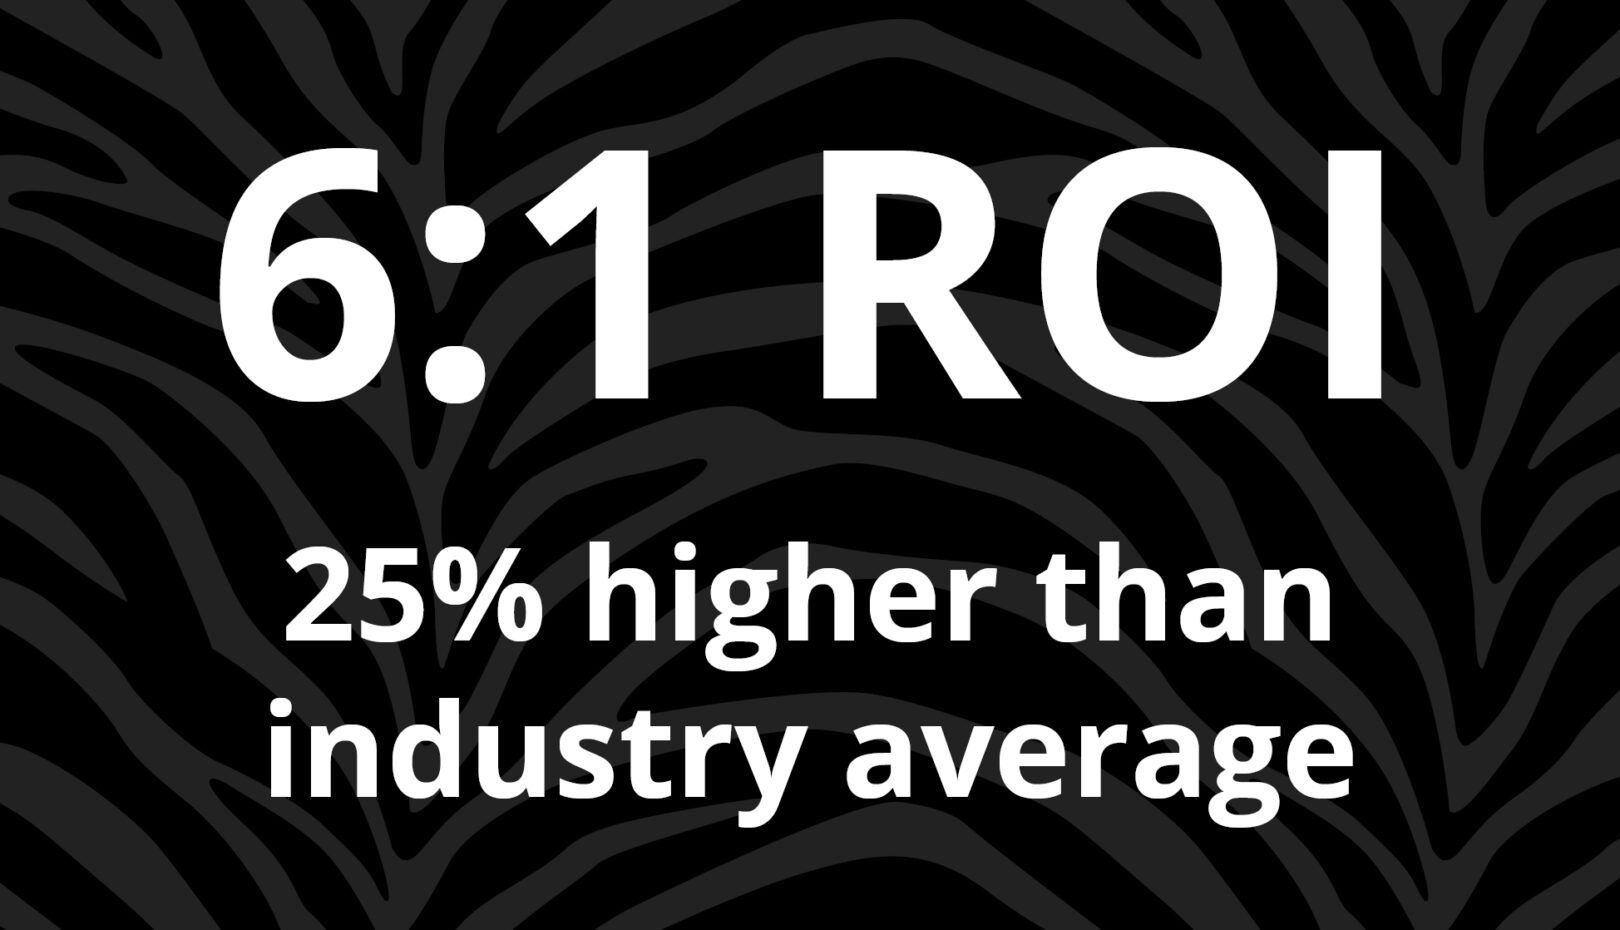 A black and white sign that says 6 : 1 roi 25% higher than industry average